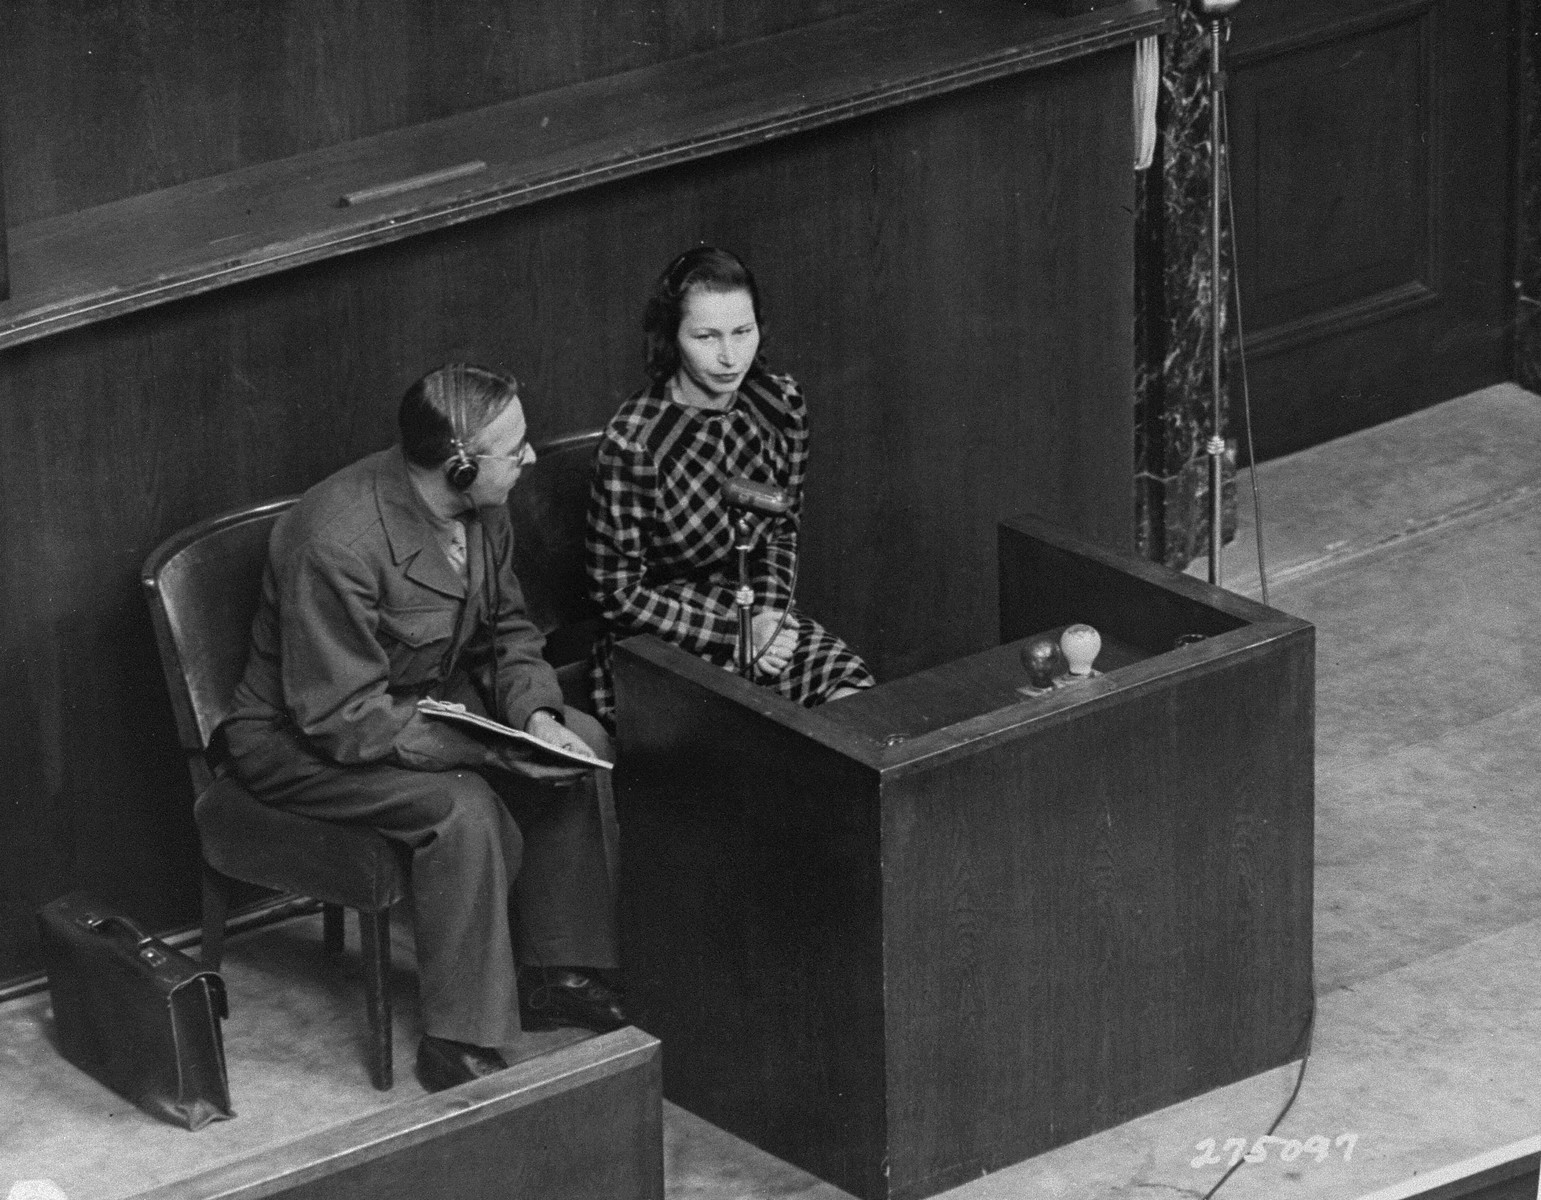 Wladislava Karolewska, one of four Polish women to appear as prosecution witnesses, on the stand at the Doctors Trial.